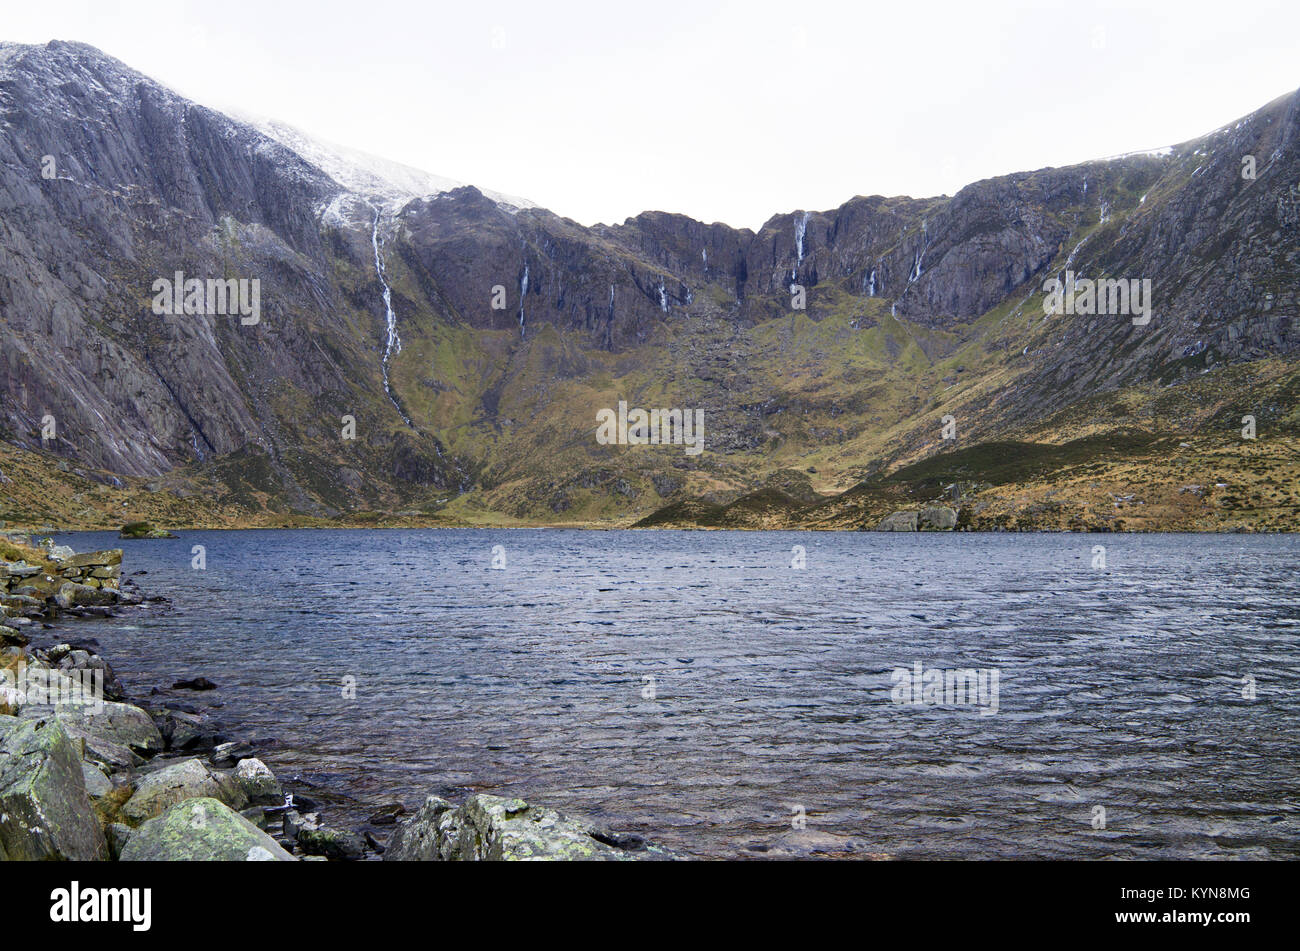 Cwm Idwal is a cirque (or corrie) in the Glyderau Range of the Snowdonia National Park. The view here shows the so-called Devil's Kitchen. Stock Photo